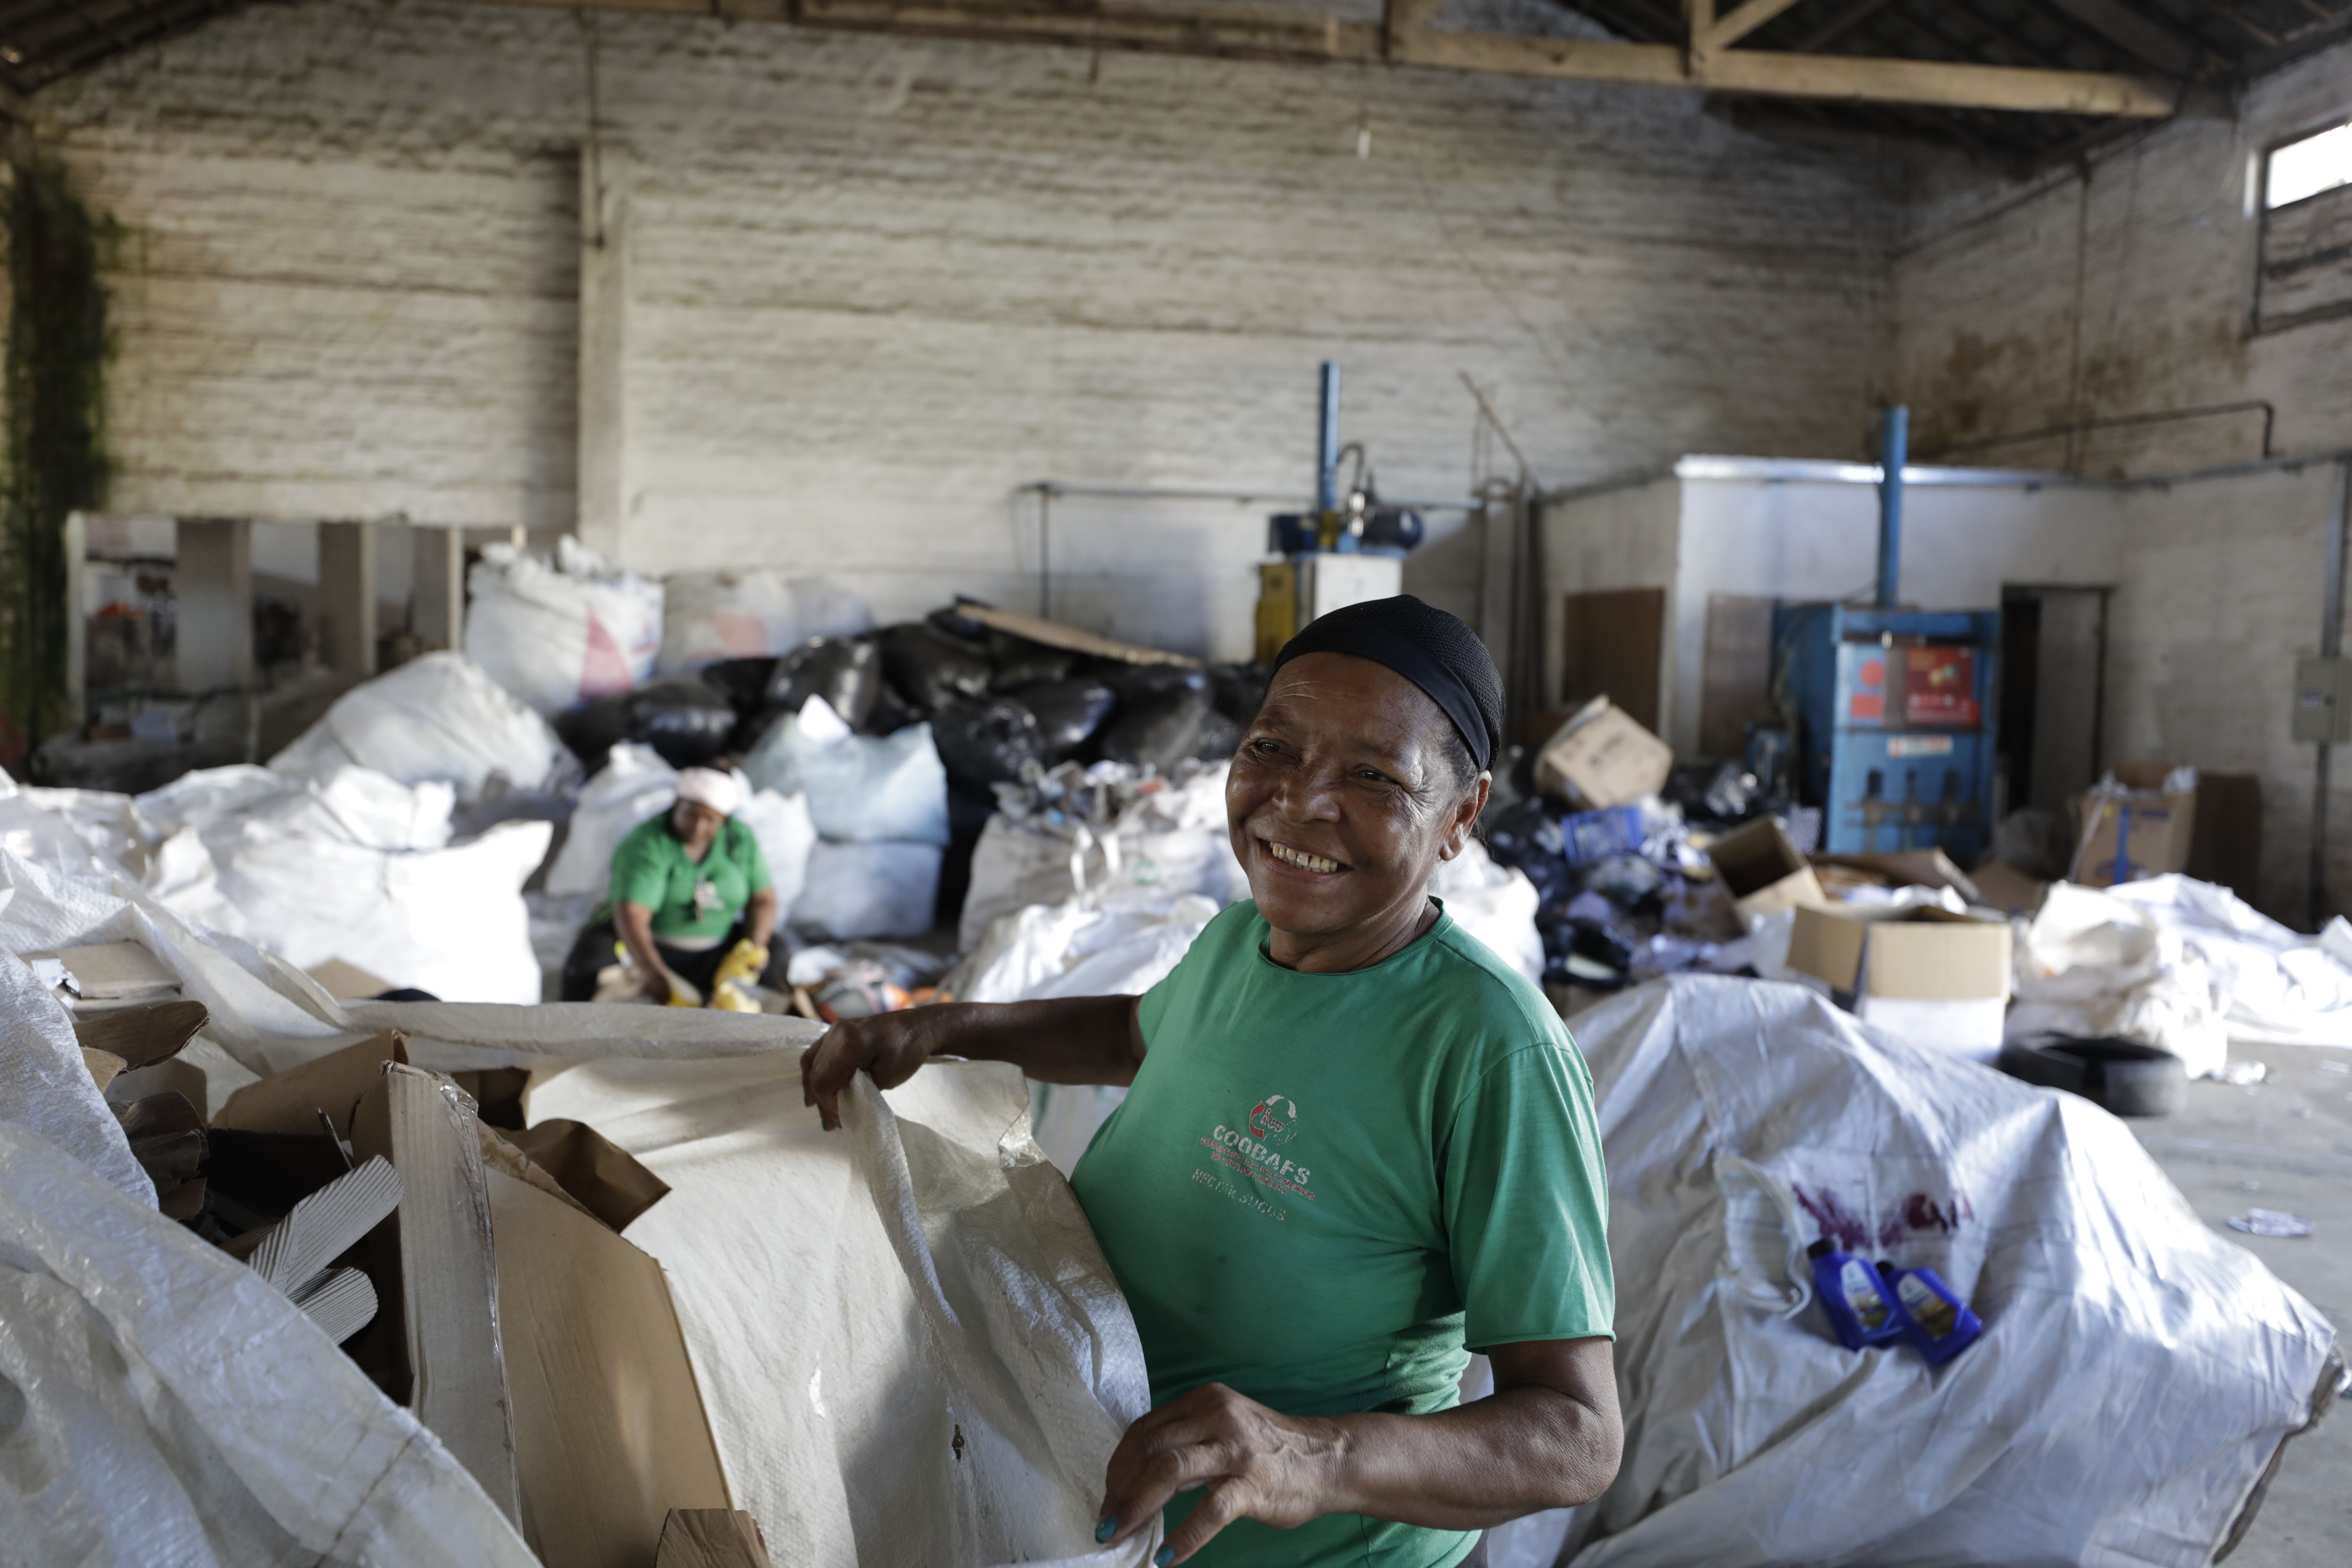 A worker at a recycling cooperative in Brazil smiles as she sorts waste. Another workers is sorting waste in the background and there are several large white bags stuffed with waste behind her. 